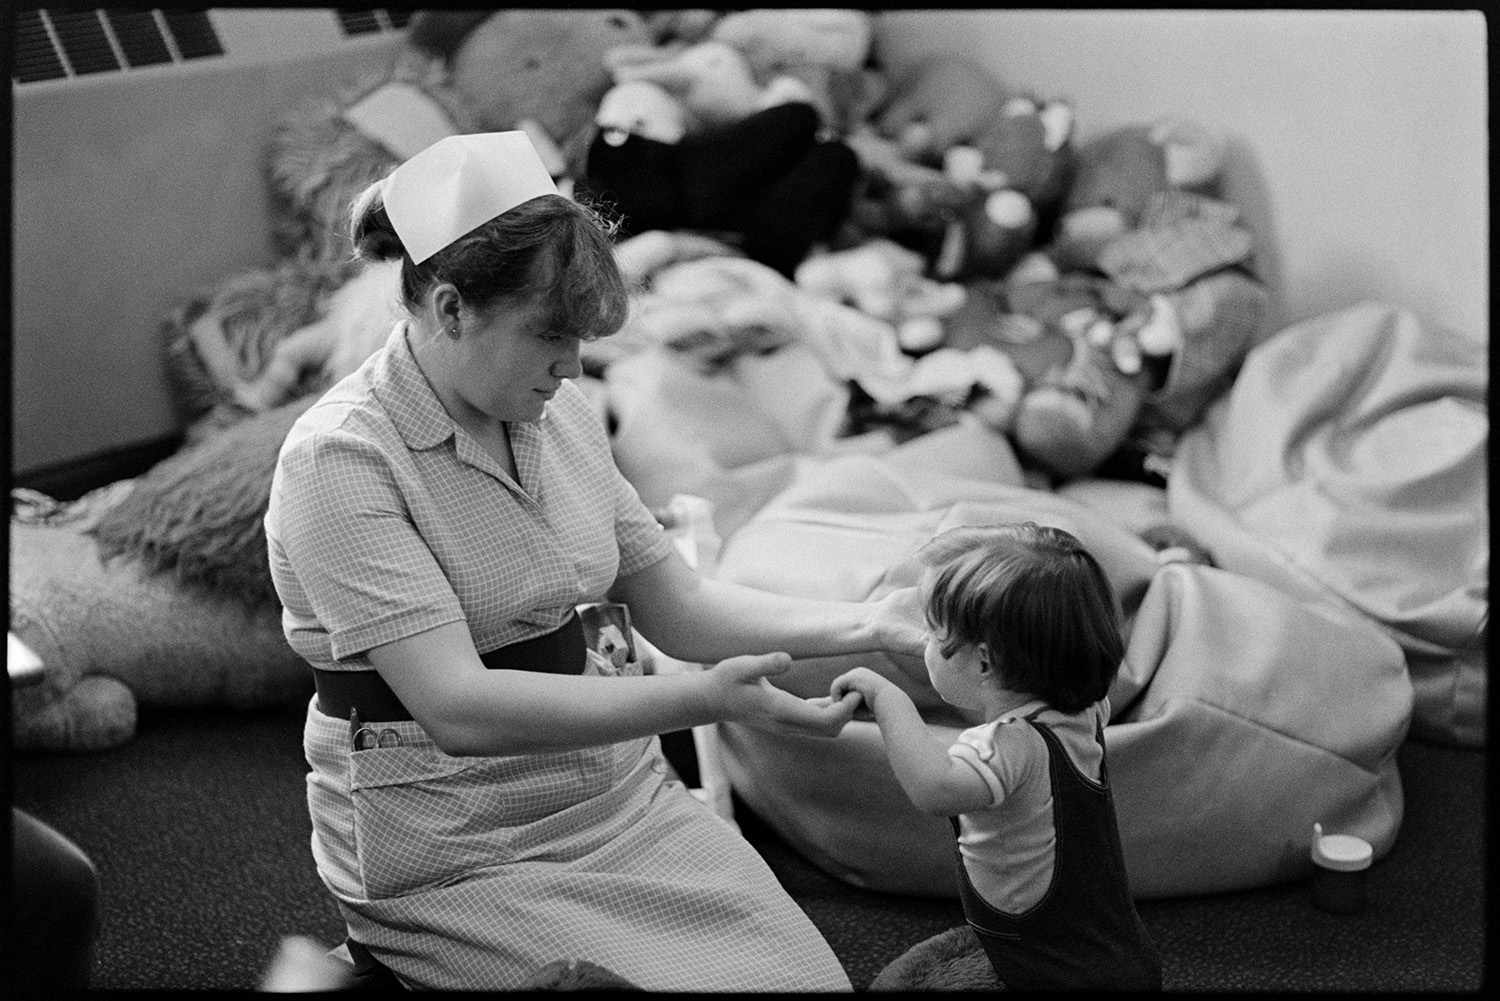 Hospital children's ward, nurses, mothers with children in wards, Sister at ward, cuddly toys. 
[A nurse playing with a young child in the Children's Ward at Barnstaple general Hospital. A pile of bean bags and soft toys can be seen in the background.]